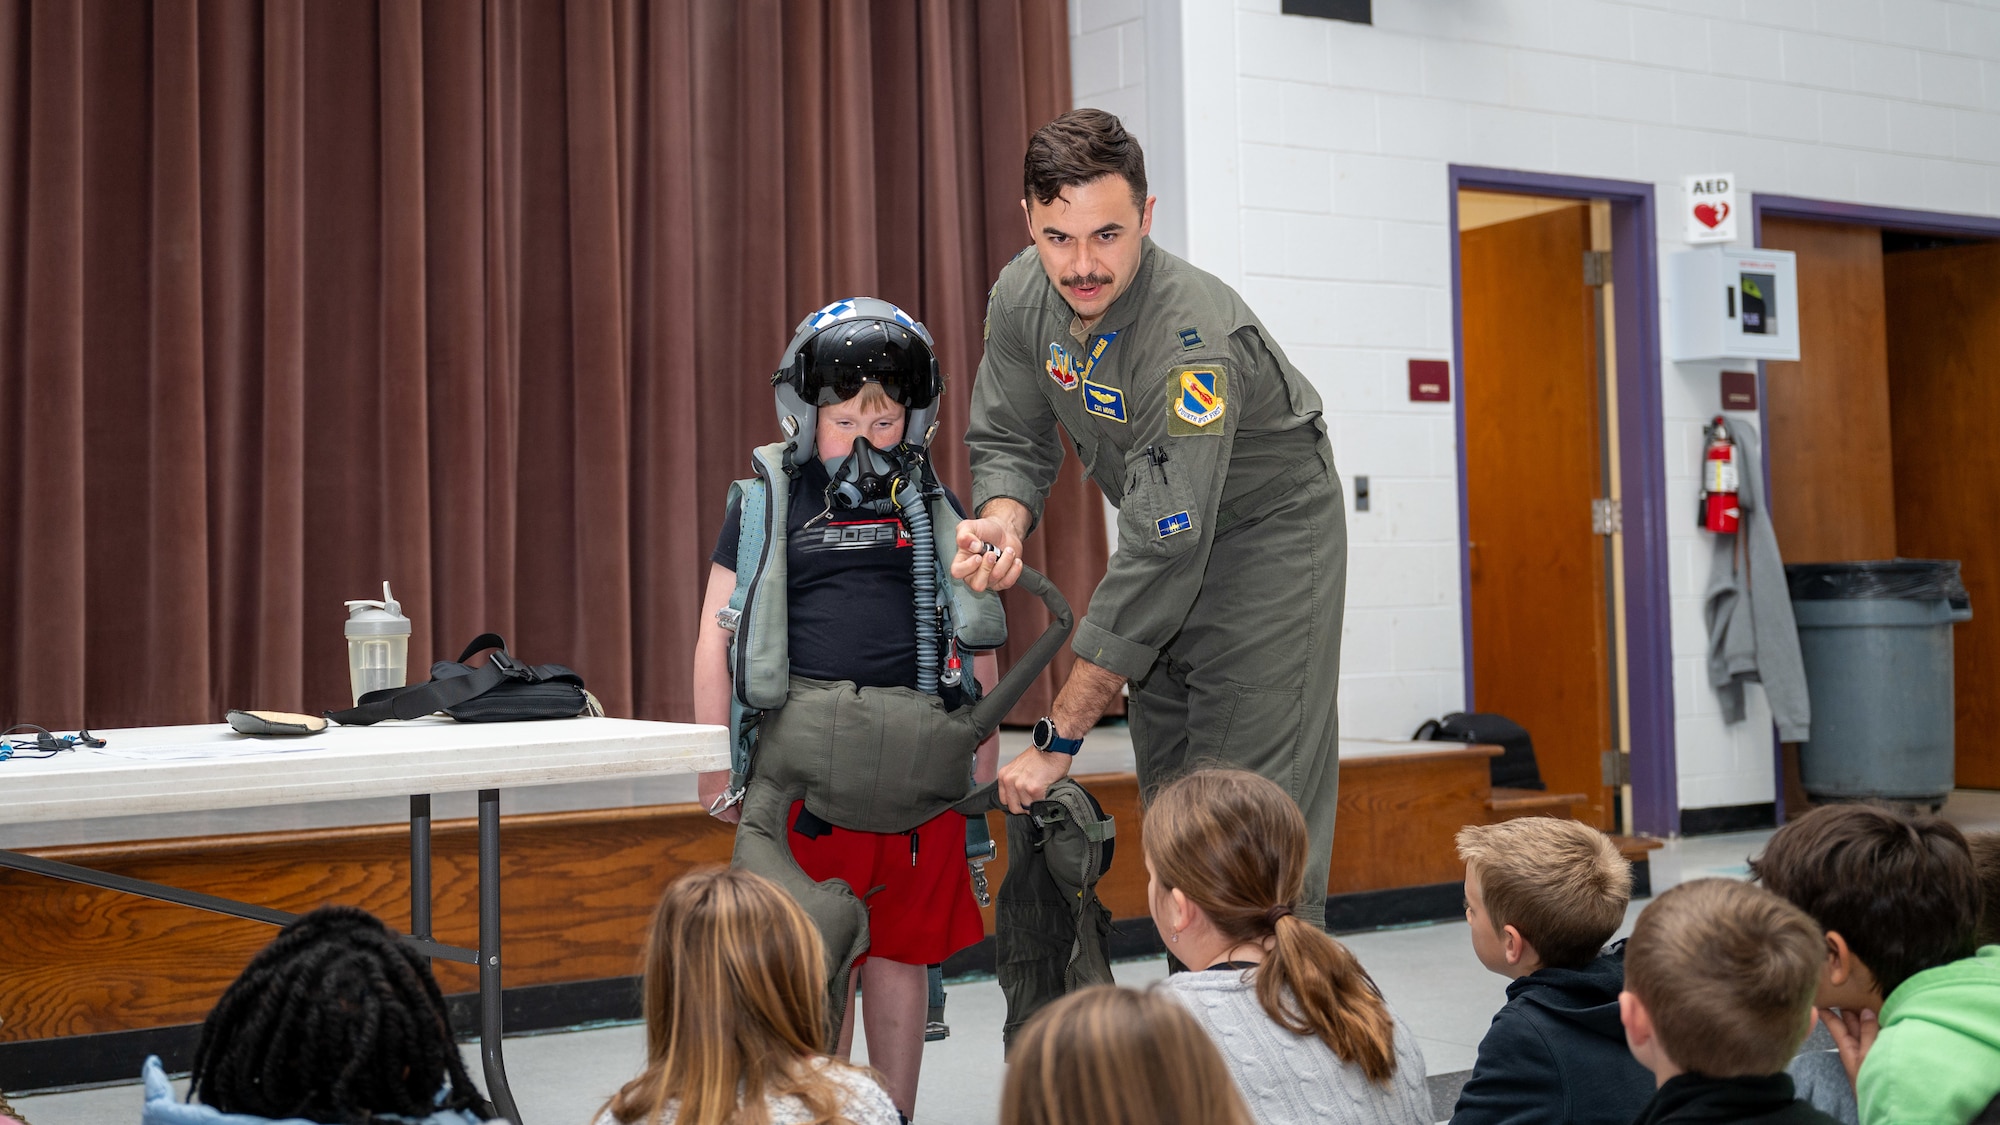 U.S. Air Force Capt. Caleb Moore, a pilot assigned to the 334th Fighter Squadron, performs a demonstration for students during a career fair in Goldsboro, North Carolina, Mar. 27, 2024. At the fair, Airmen from the 4th Fighter Wing showcased their career fields to allow students an opportunity to learn about different specialities within the Air Force. (U.S. Air Force Photo by Airman Rebecca Tierney)